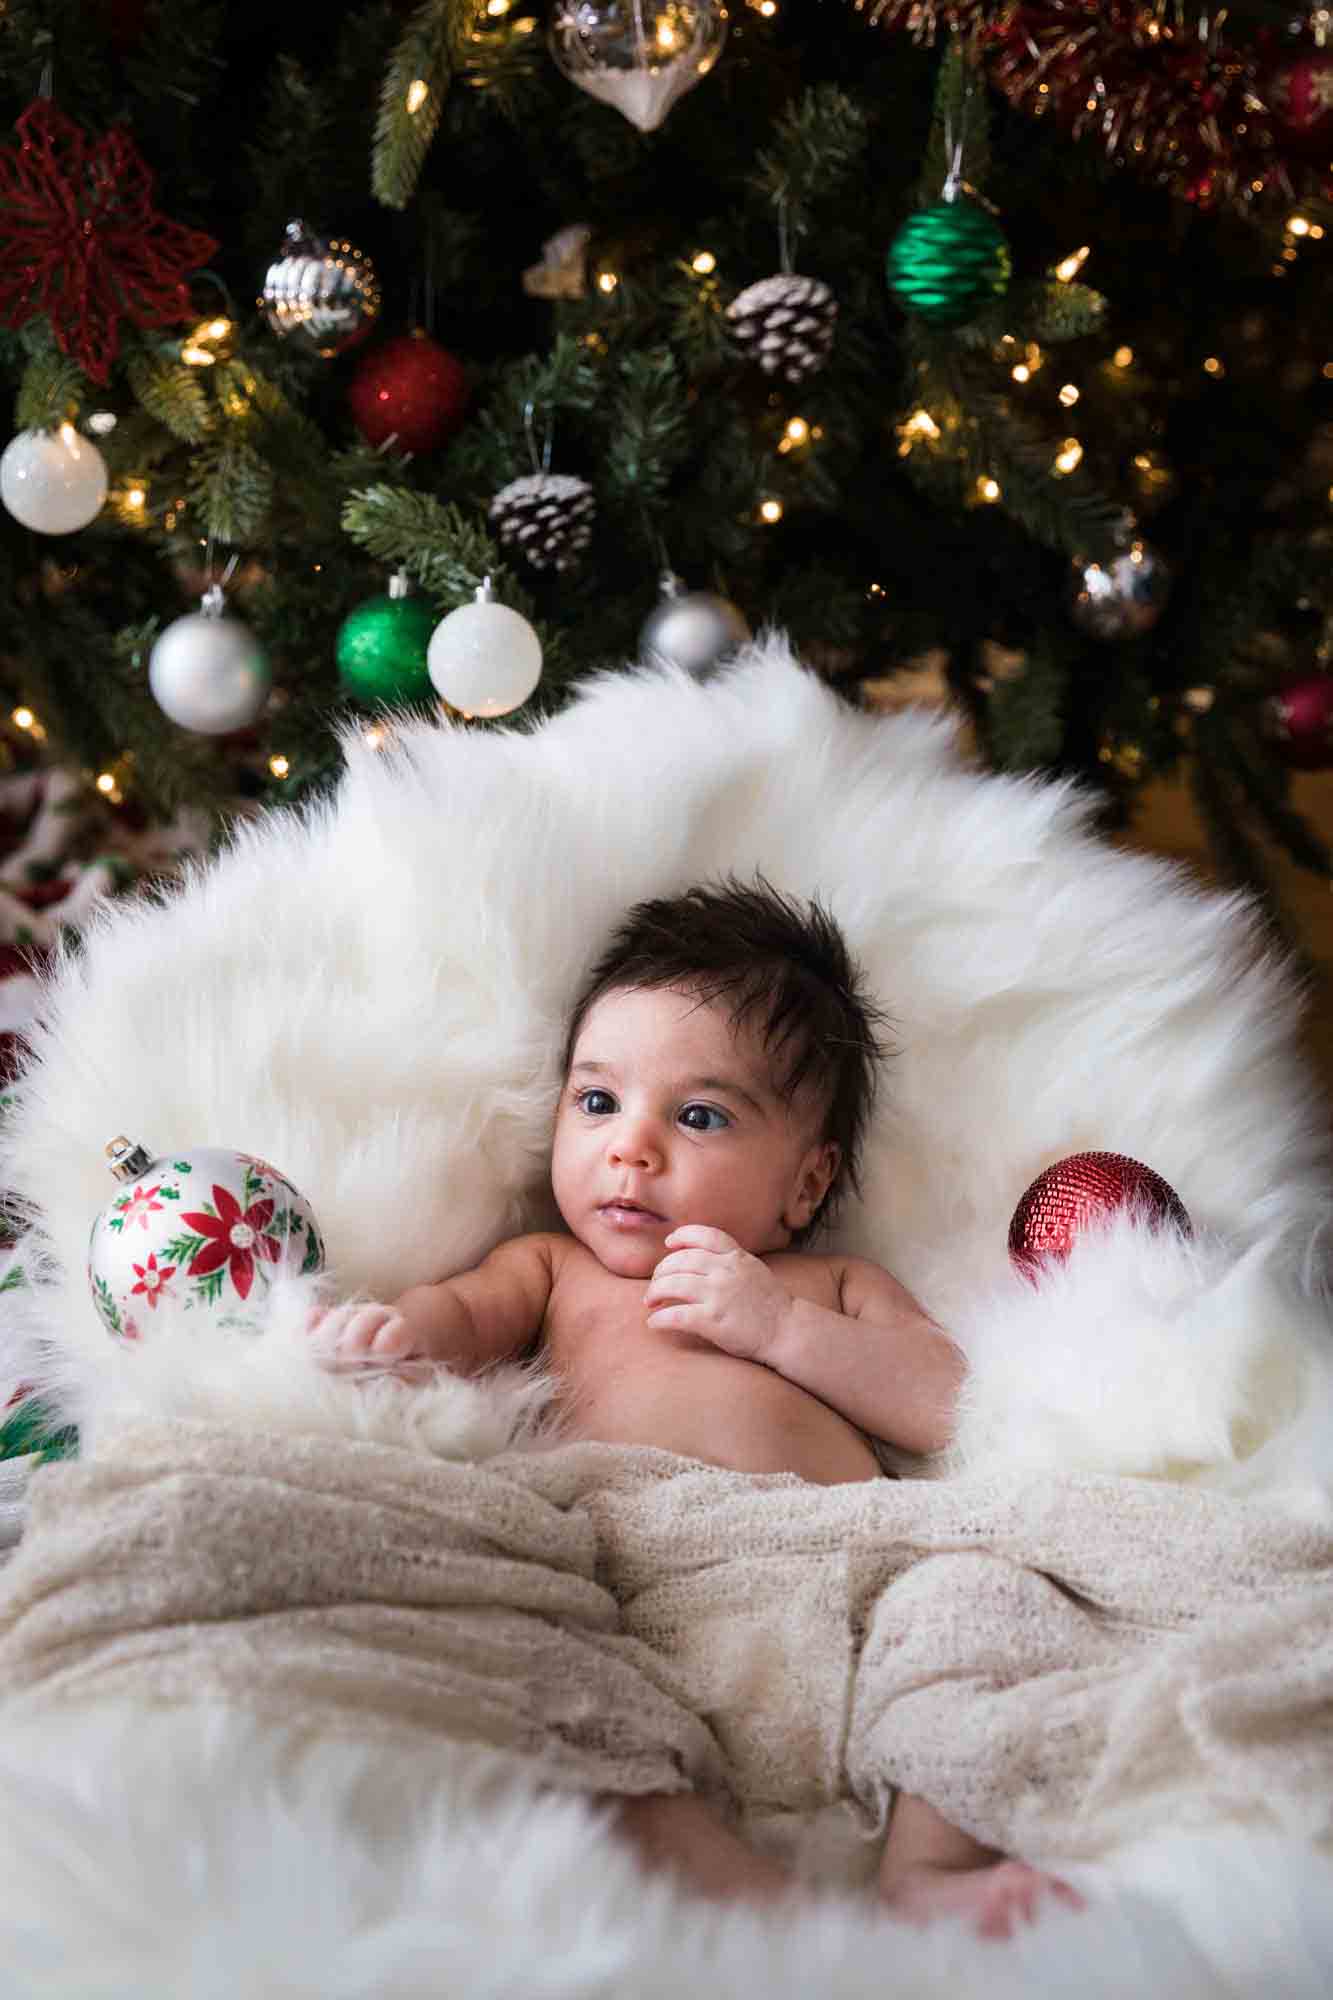 Newborn baby on white rug looking at Christmas ornaments in front of tree